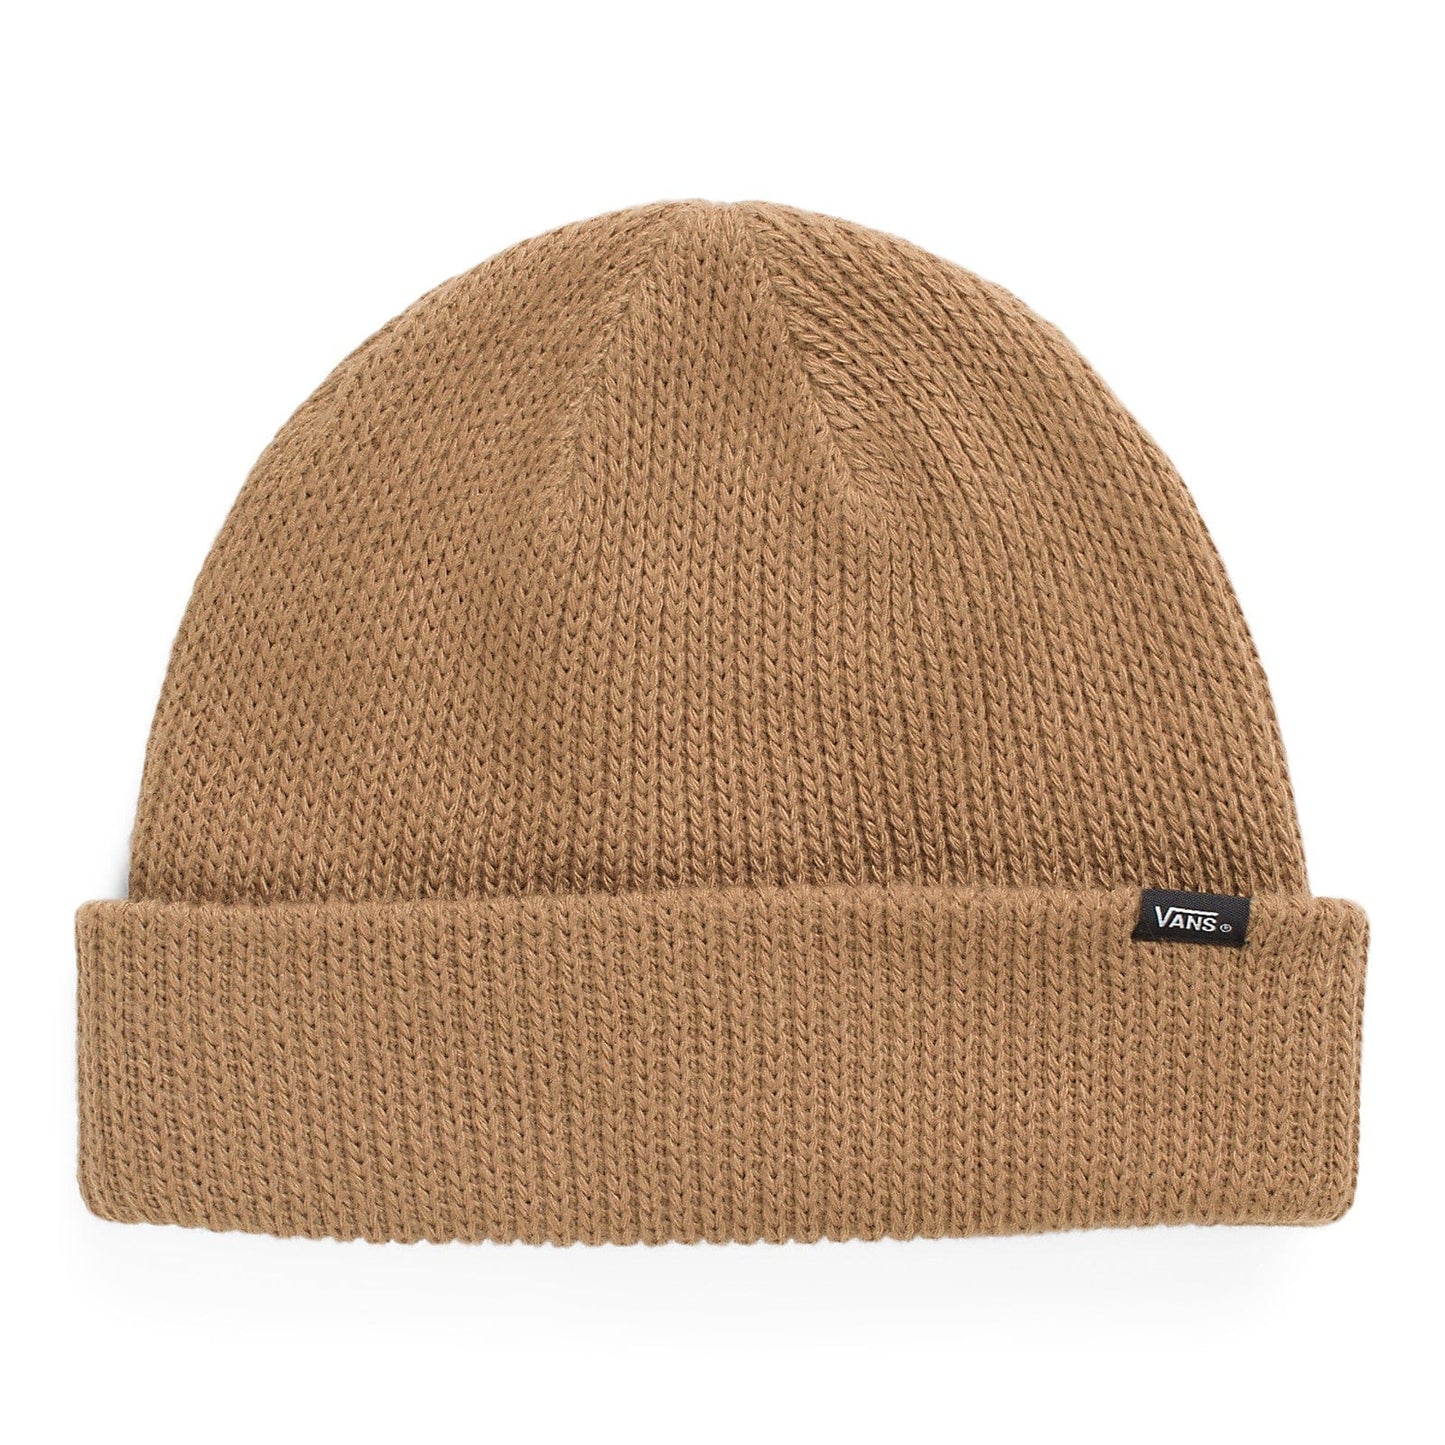 Vans | Core Basic Beanie - Toasted Coconut